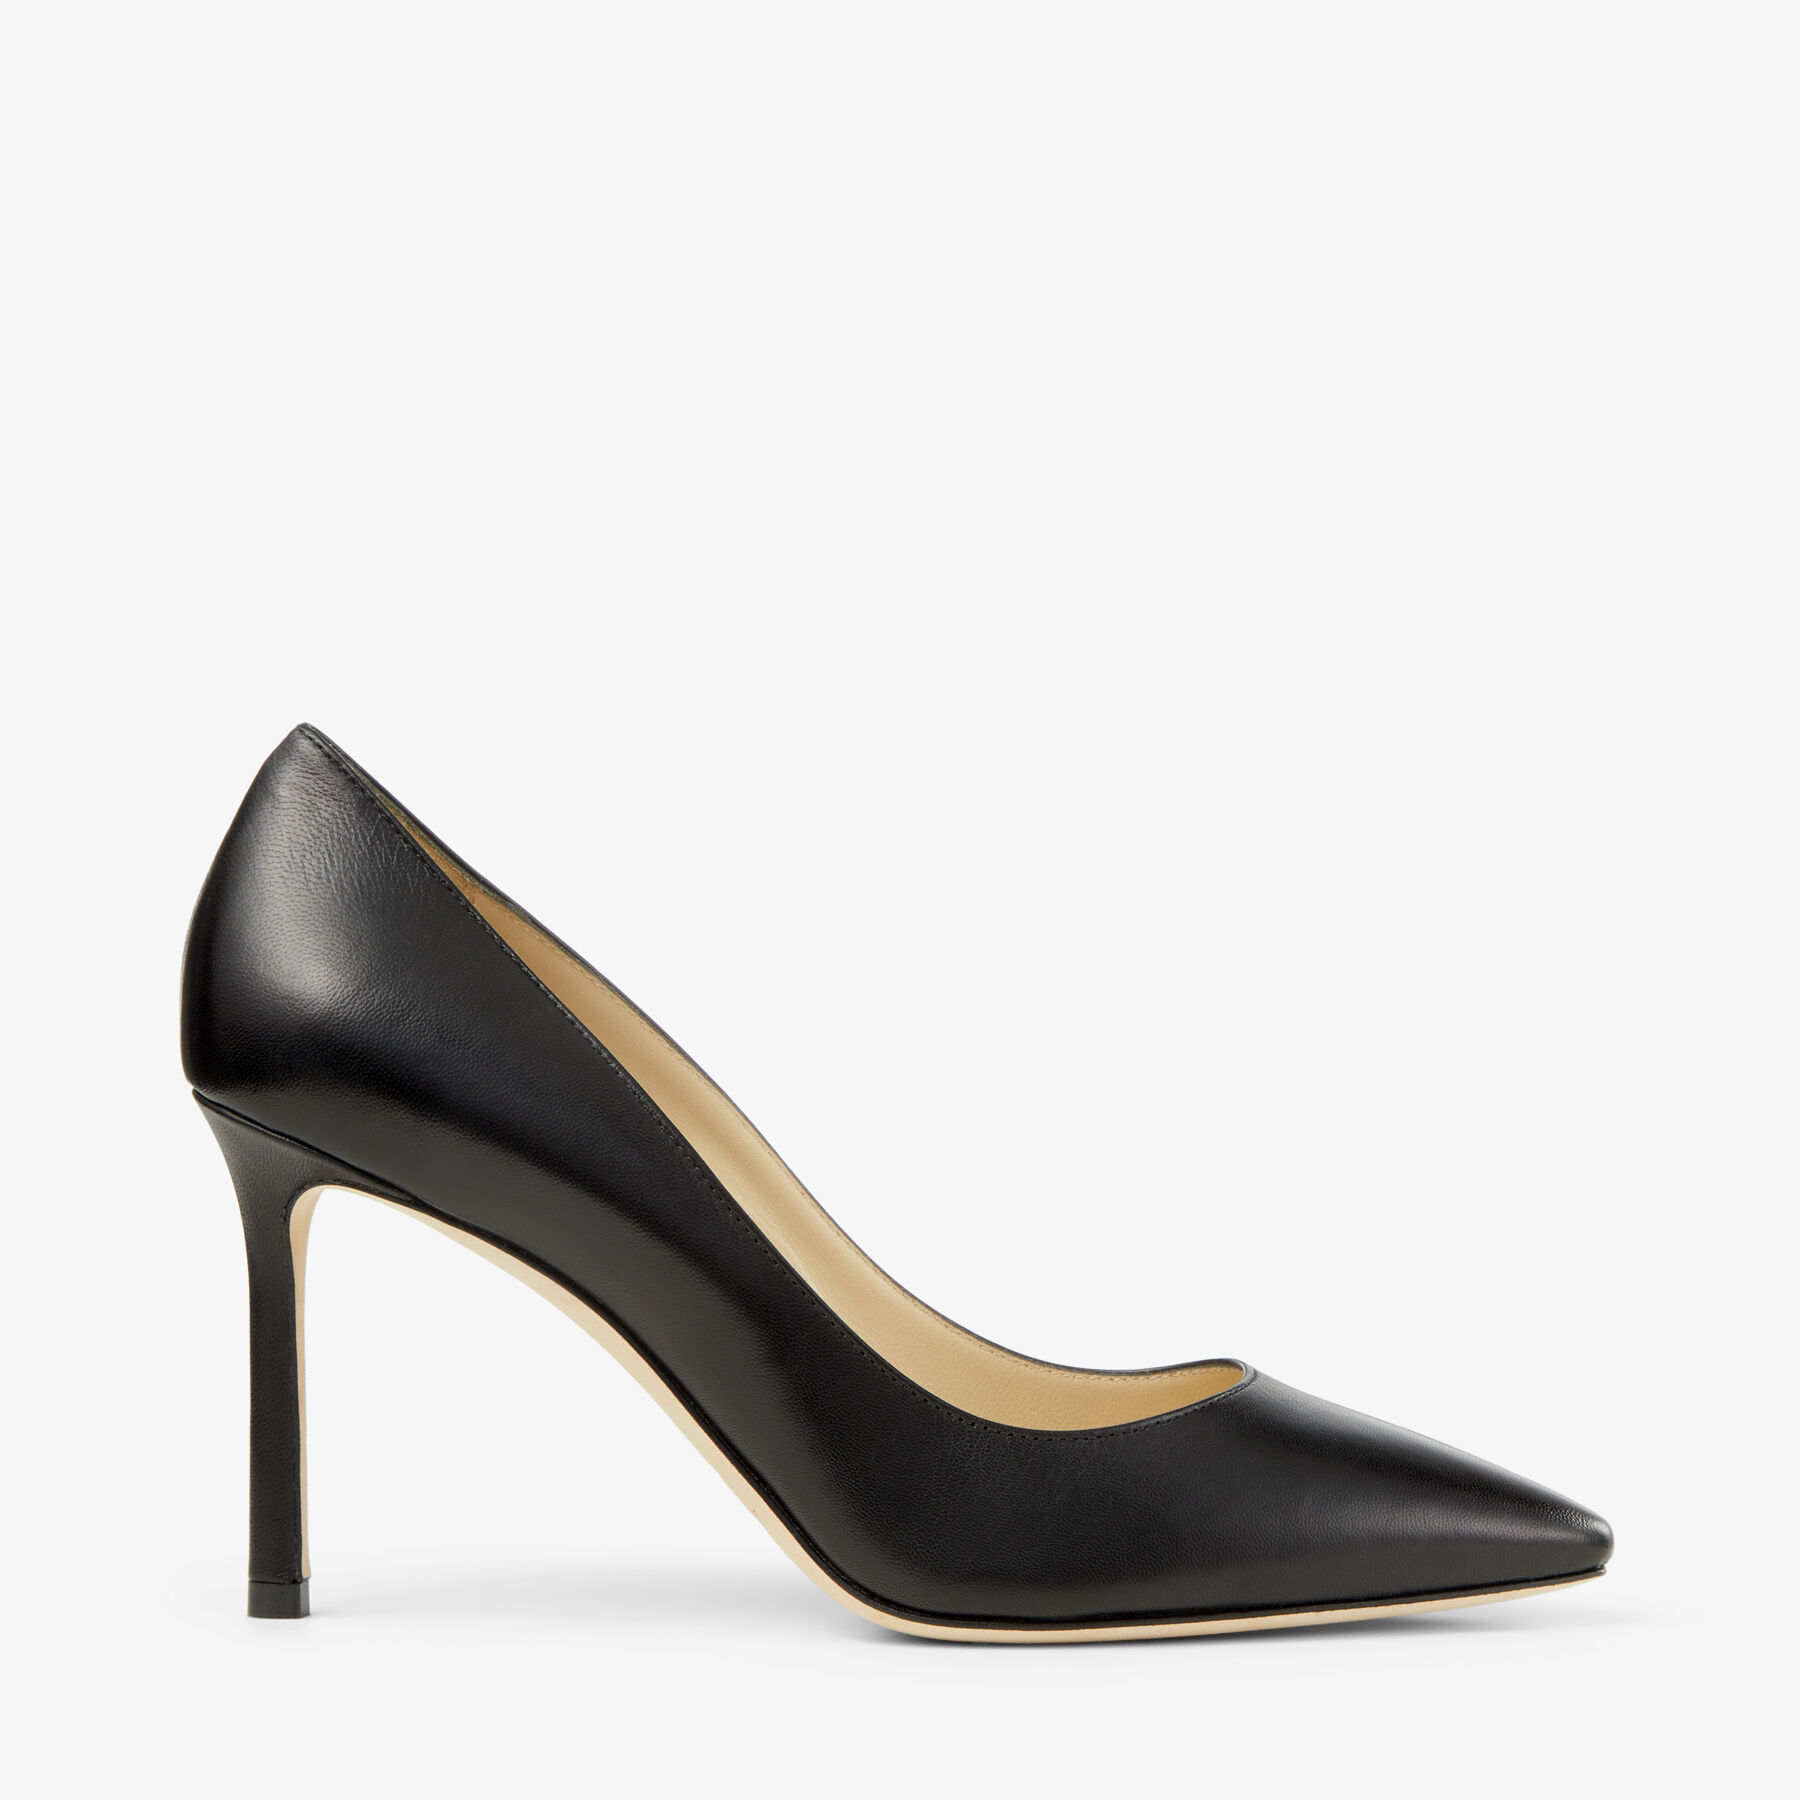 Black Kid Leather Pointy Toe Pumps, Romy 85, Pre Fall 16